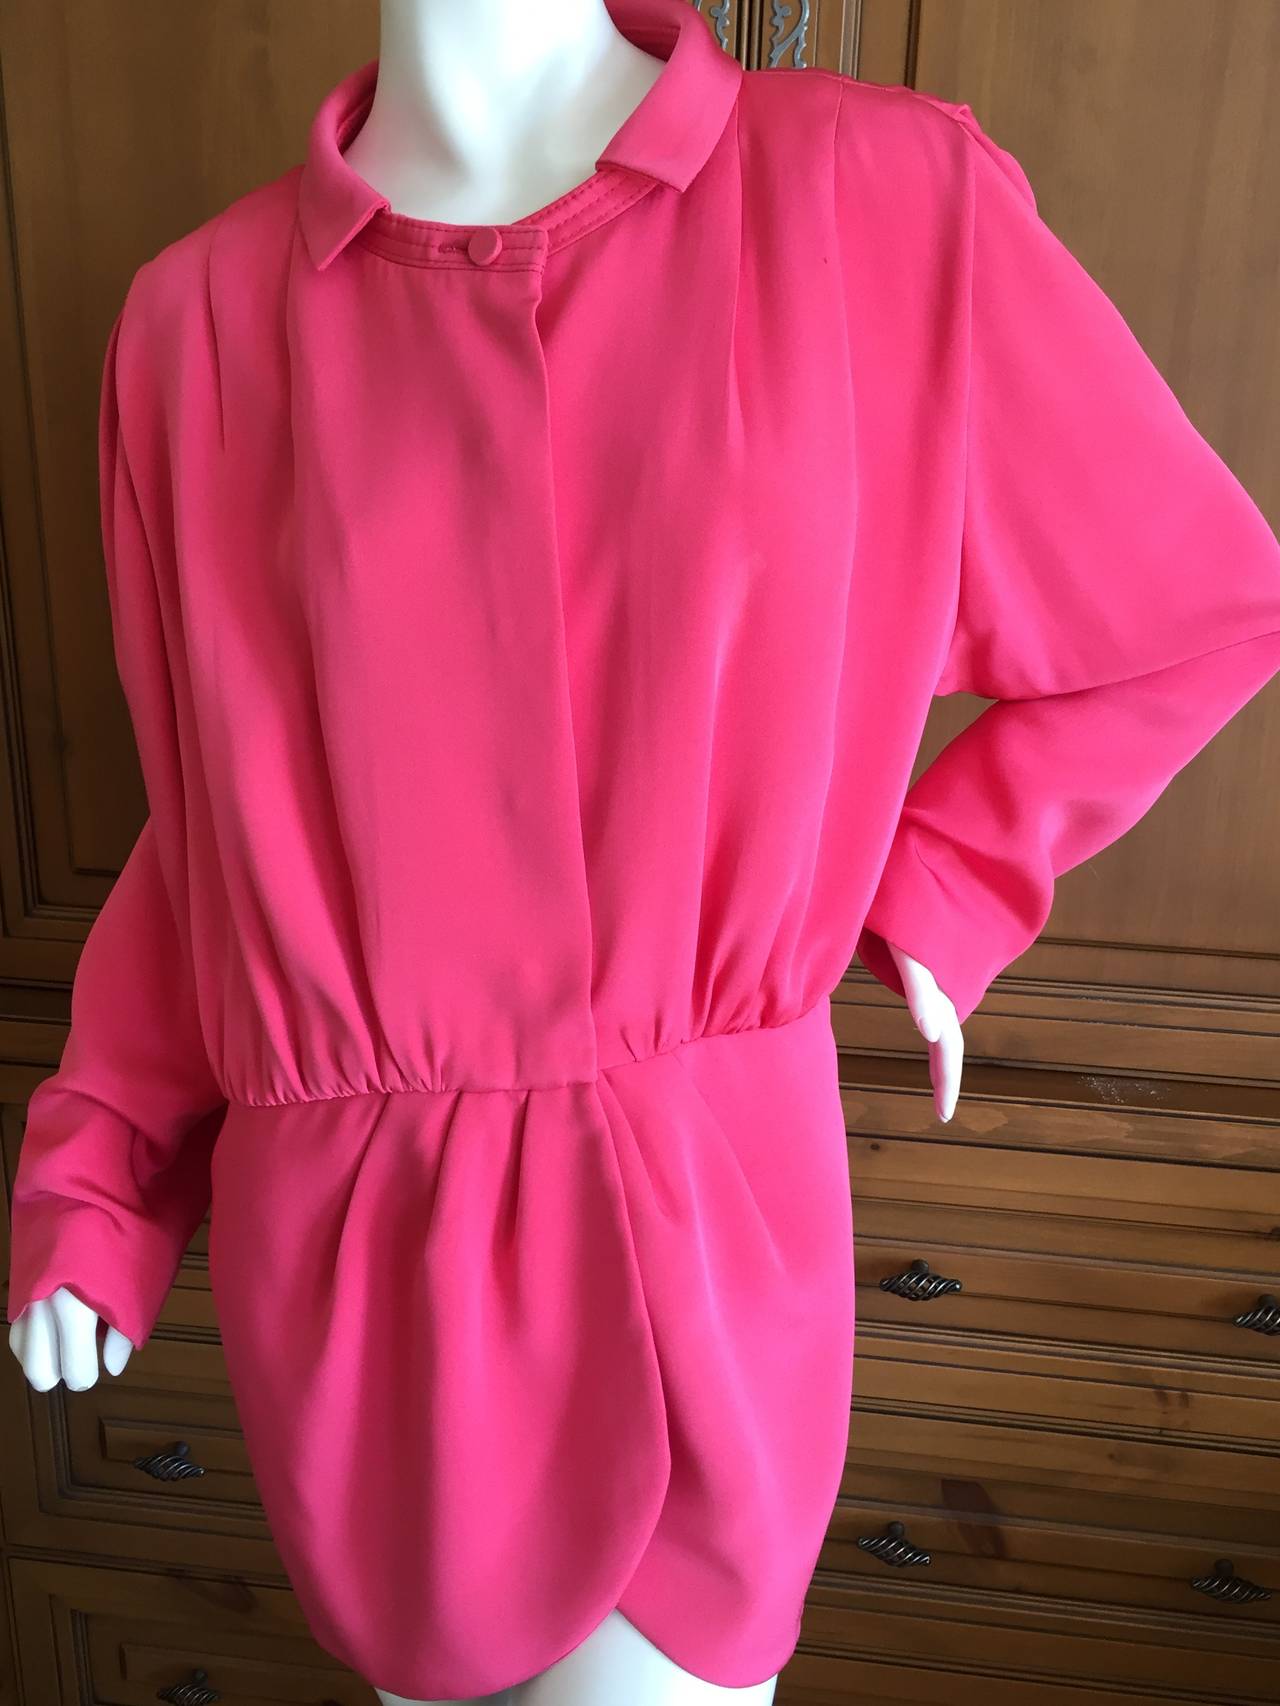 Galanos Hot Pink Silk Jacket In Excellent Condition For Sale In Cloverdale, CA